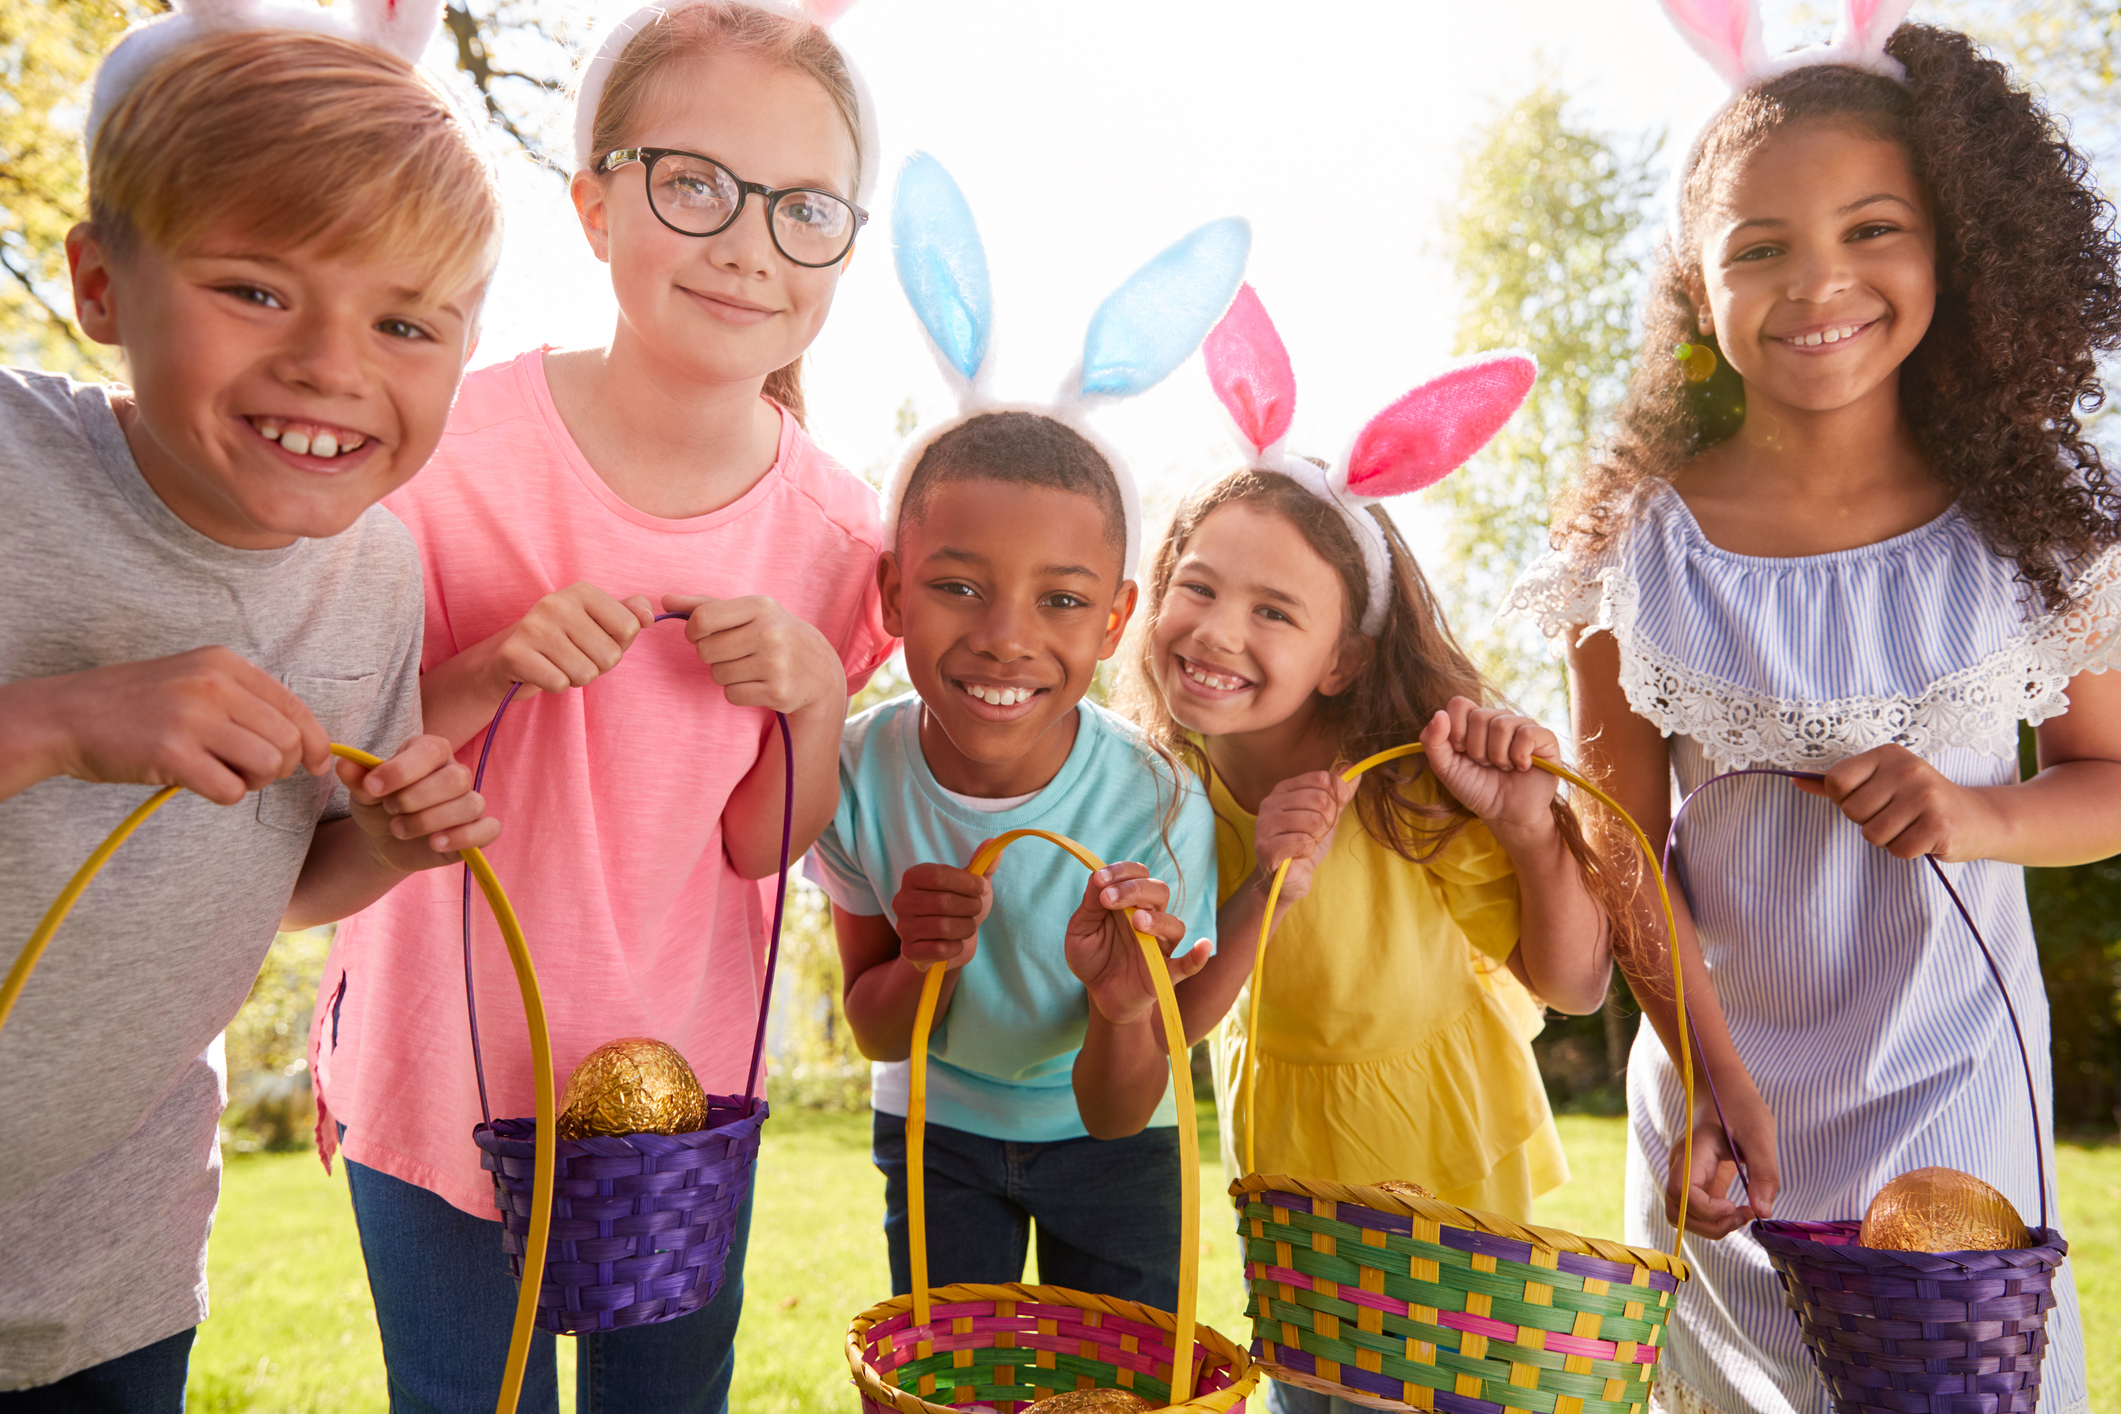 Shop for the Best Easter Gifts in Garland by Shopping at Northstar Plaza